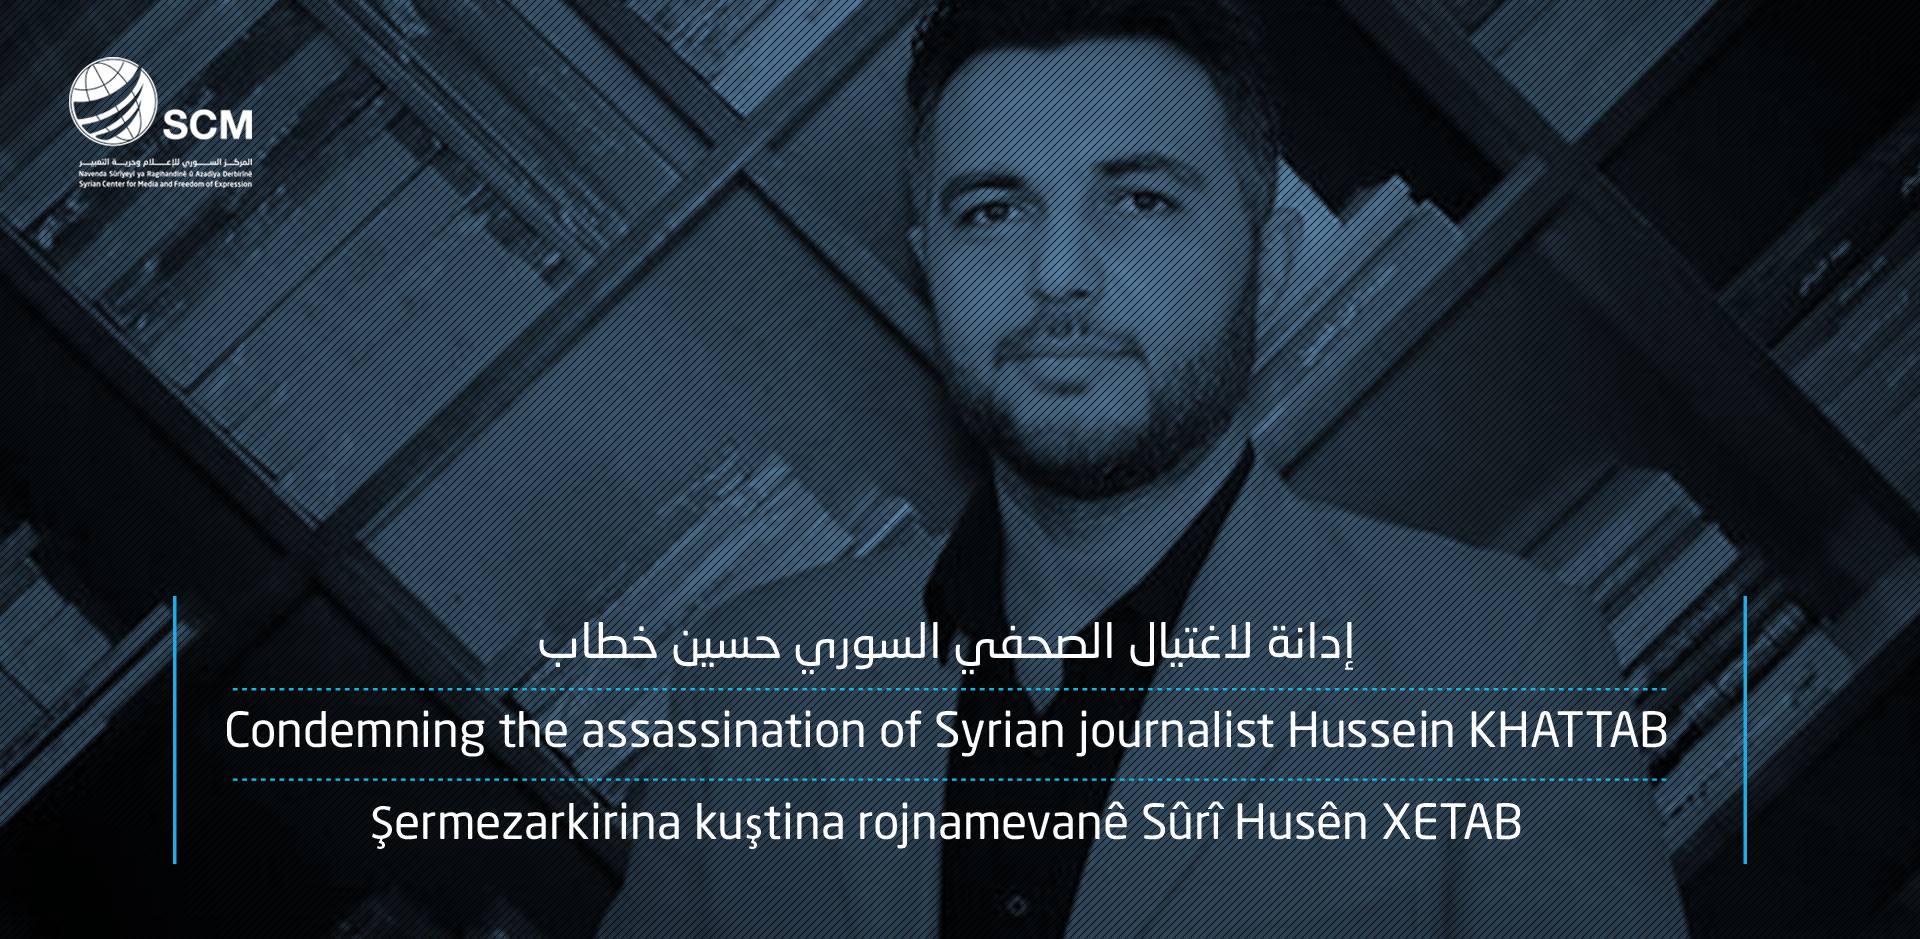 Press Release: condemns the assassination of the journalist Hussein Khattab